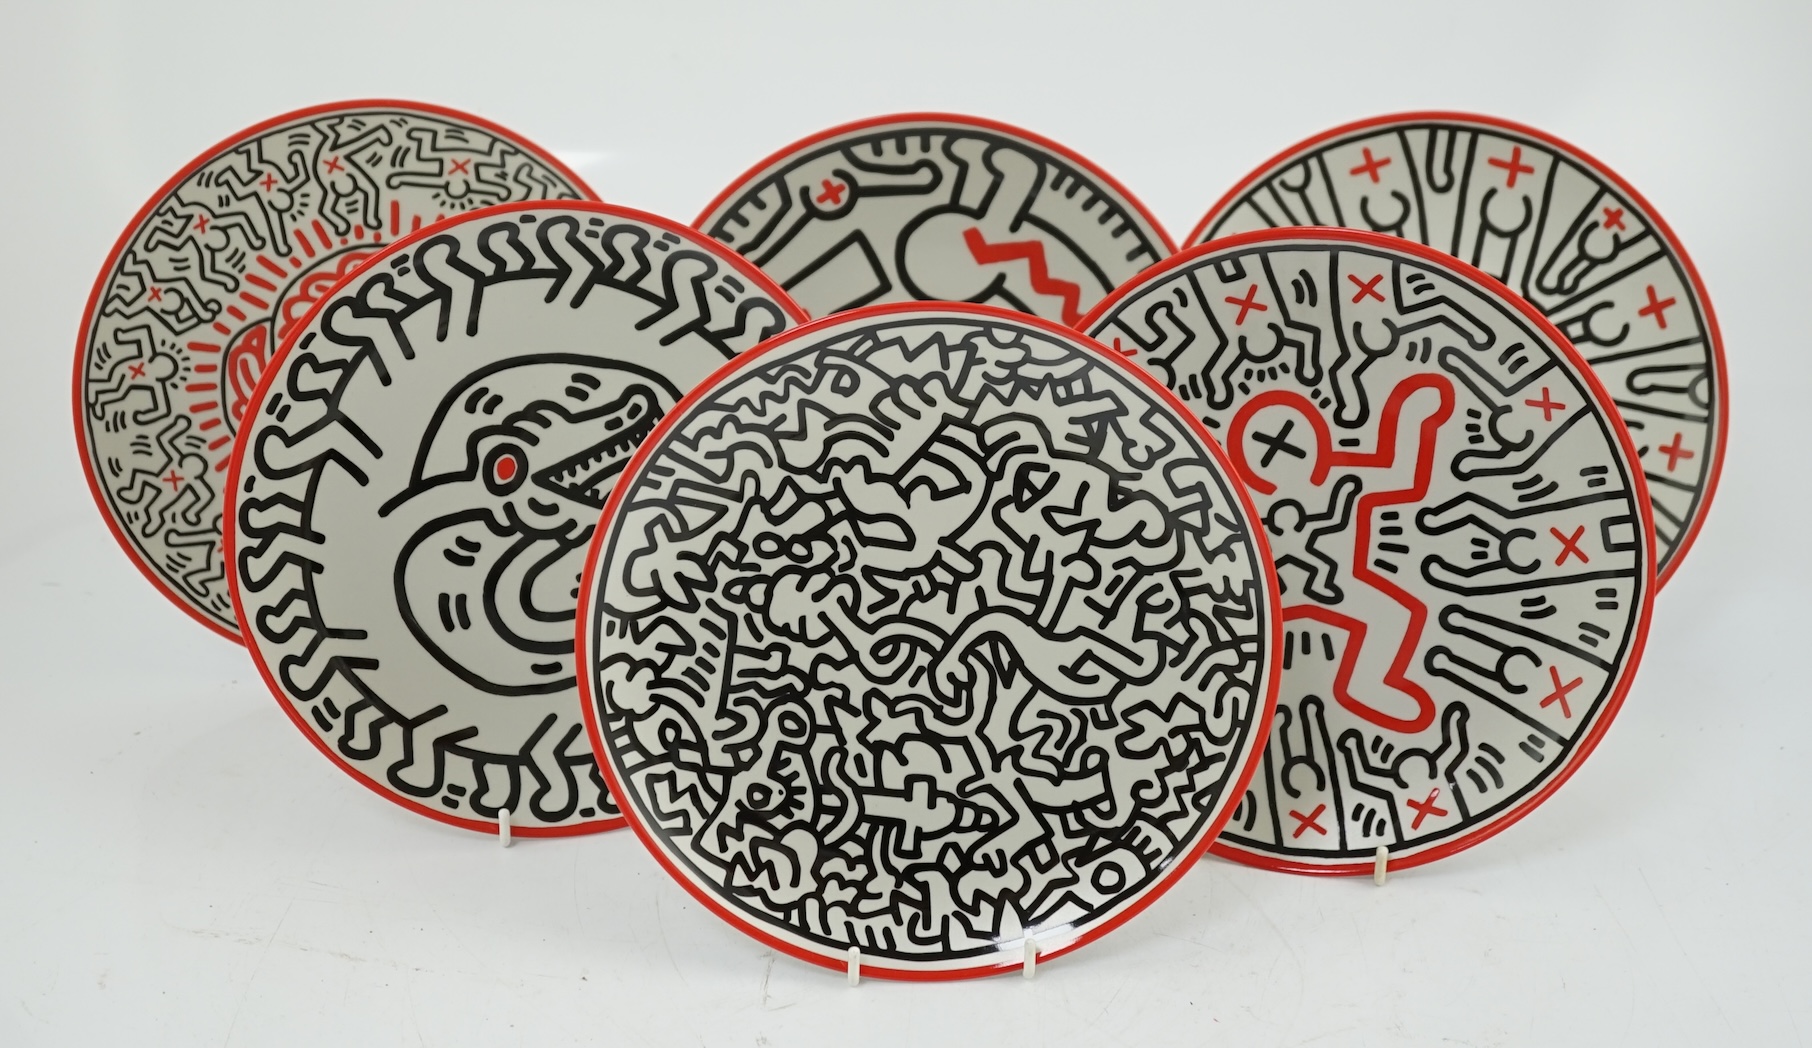 Keith Haring (American, 1958-1990) designs, a set of six Ligne Blanche, Limoges porcelain plates